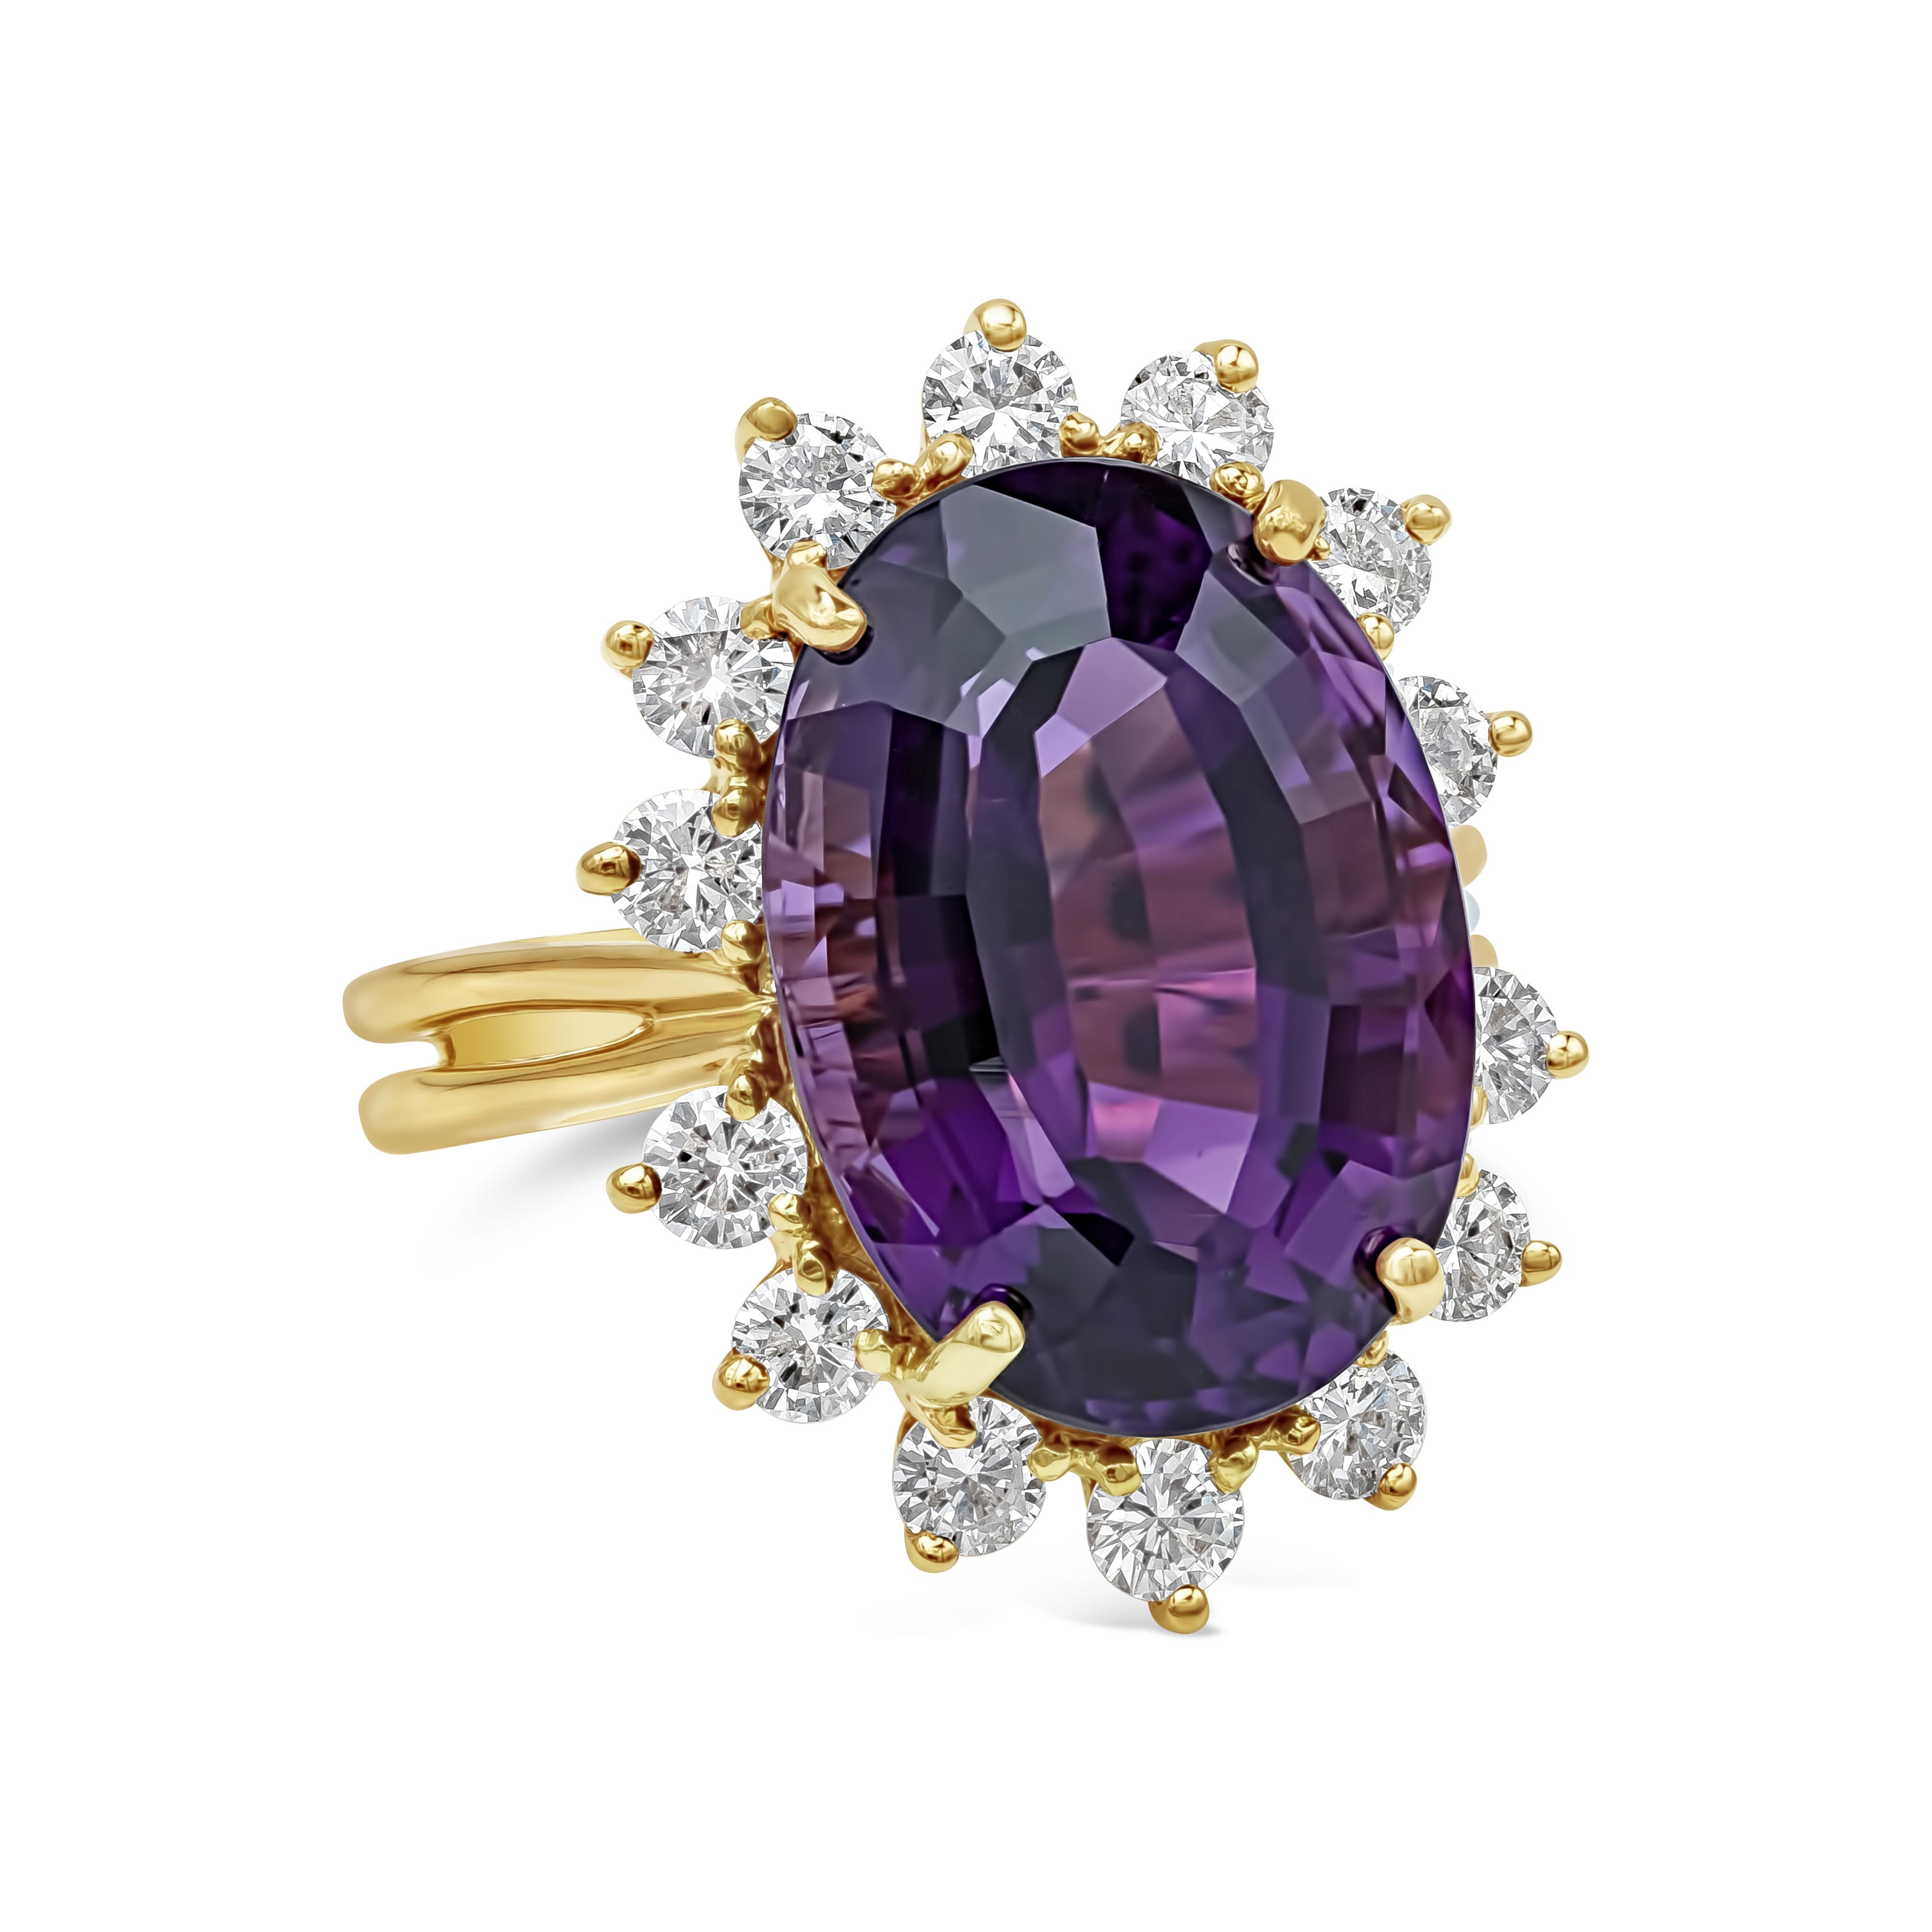 A beautiful and stunning cocktail ring showcasing a vibrant 10.95 carats oval cut purple amethyst, surrounded by a row of round brilliant diamonds, set in a two row 18k yellow gold mounting. Diamonds weigh 1.15 carats total and are approximately F